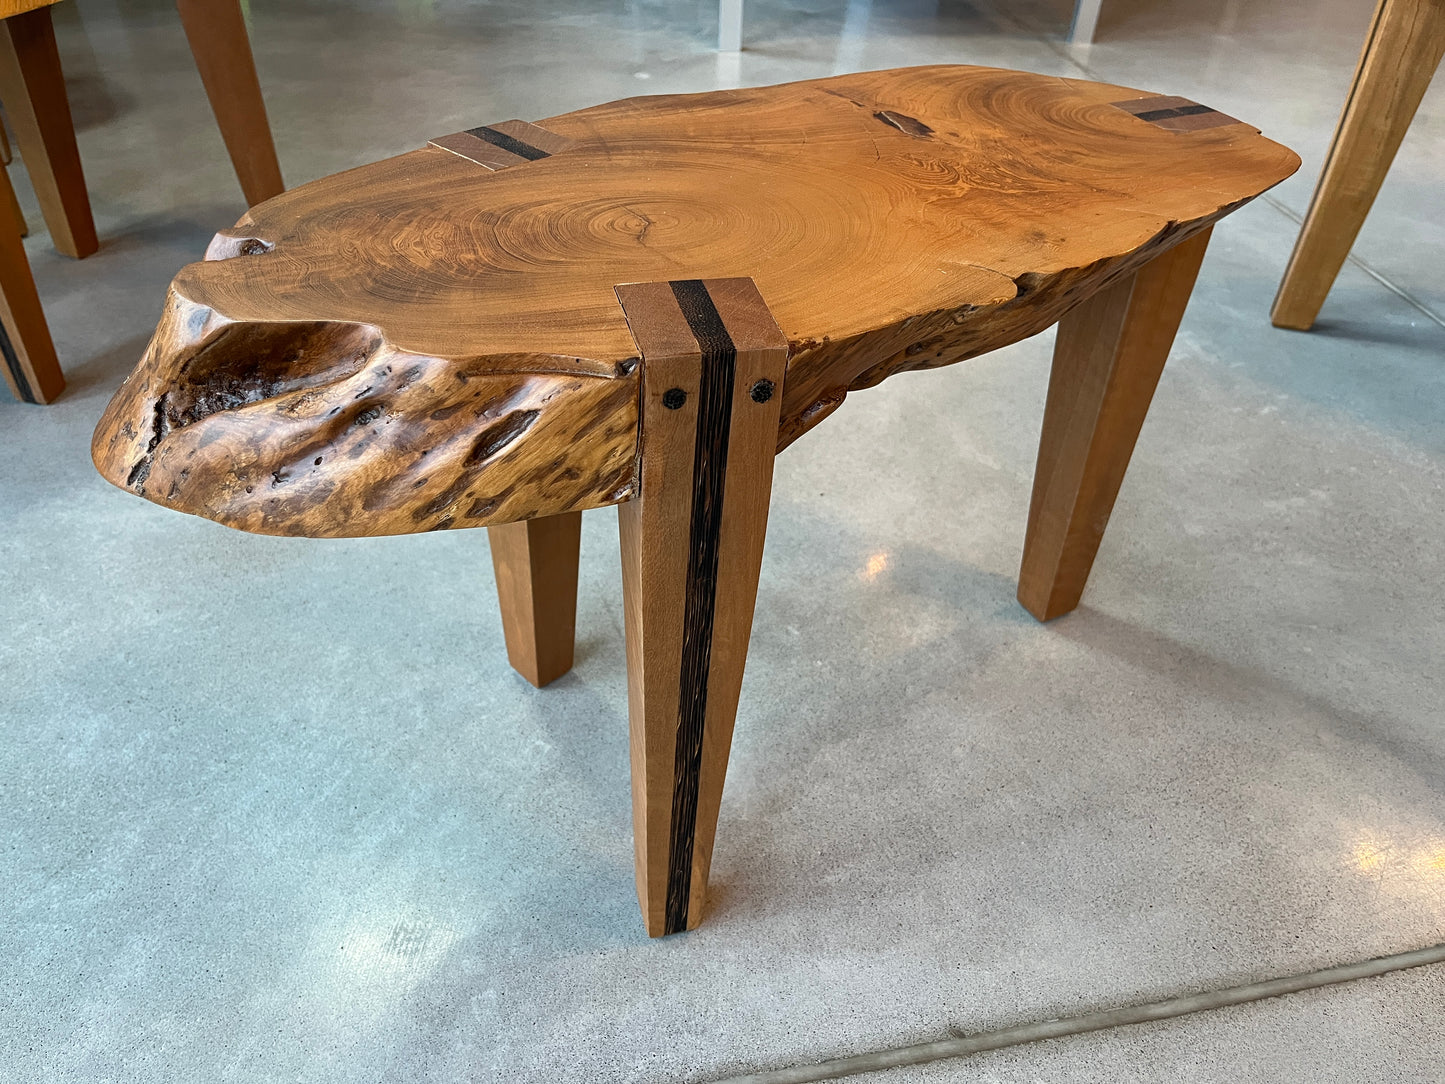 Low Side Table | River Wood Social Impact Project